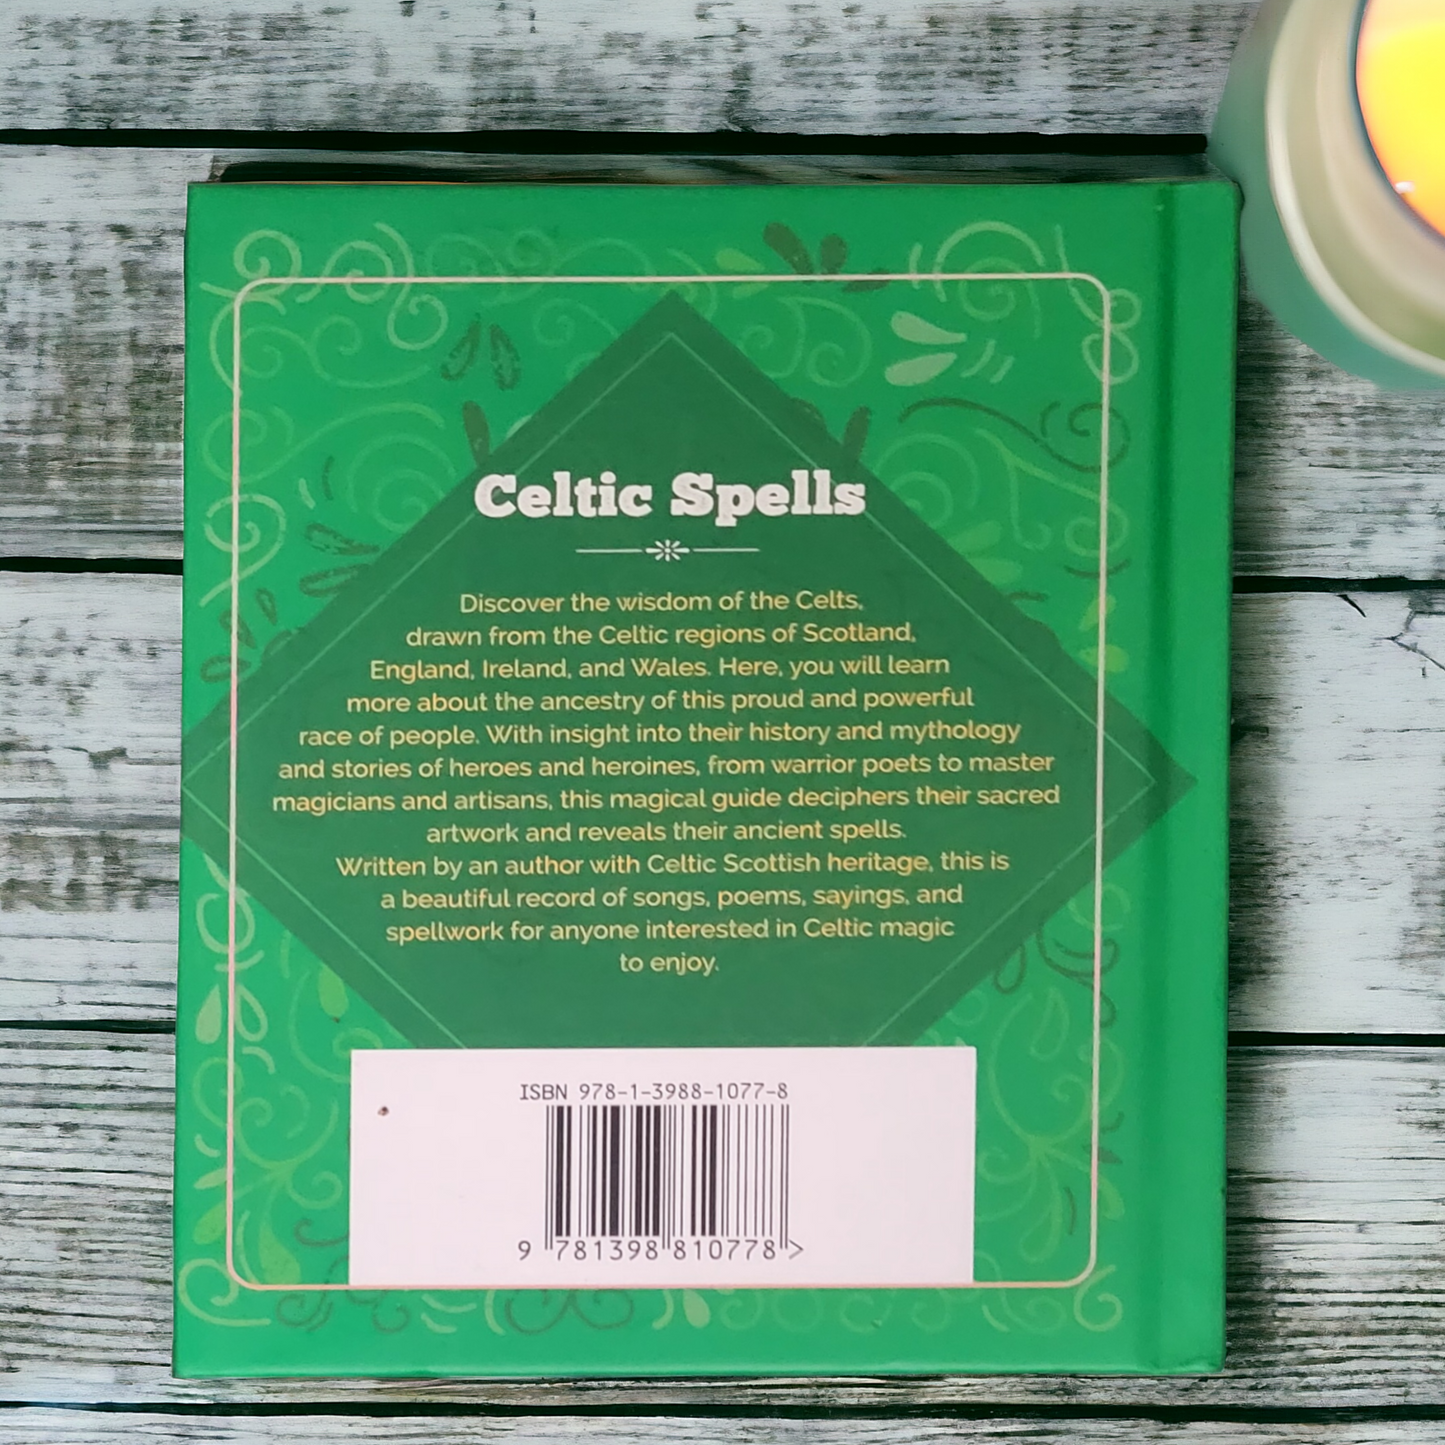 (Pre-Loved) Celtic Spells: How To Walk The Magical Pathways of Power by Marie Bruce